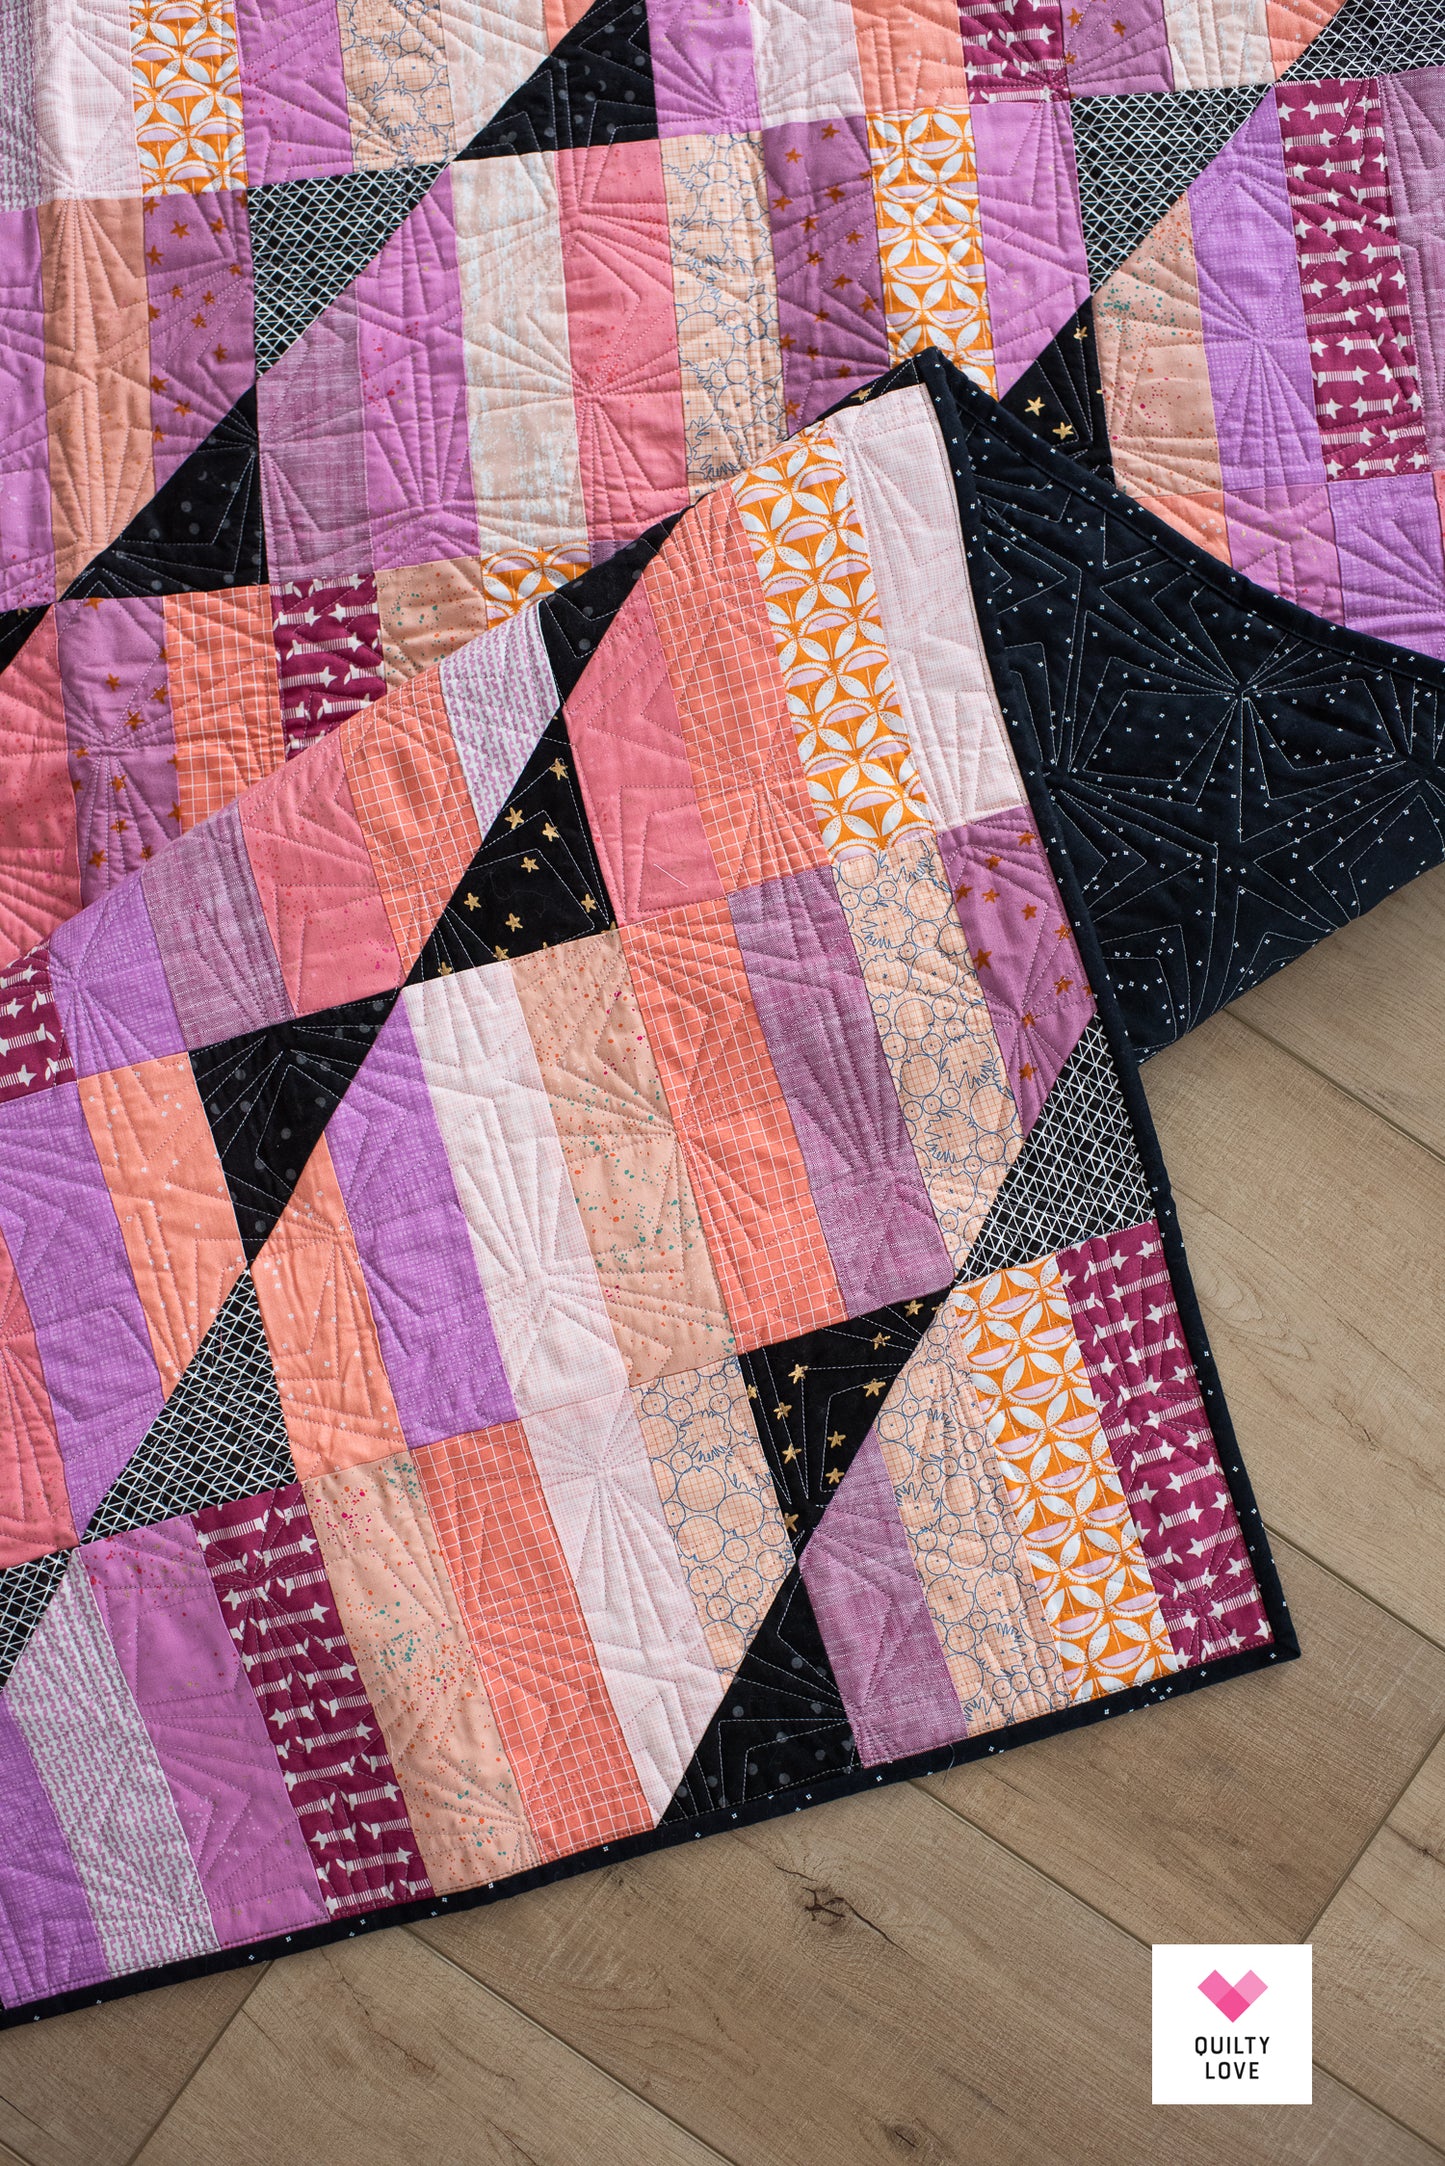 Happy Stripes Quilt - The Scrappy Peach/ Purple one